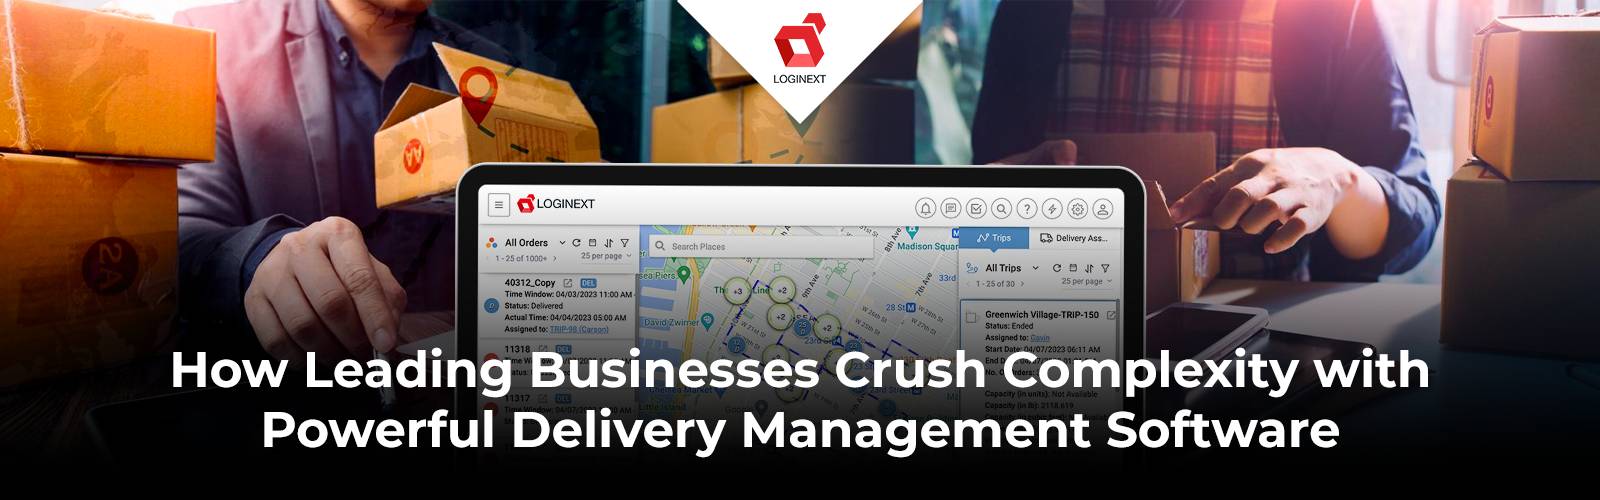 How are leading businesses handling delivery complexities using delivery management software